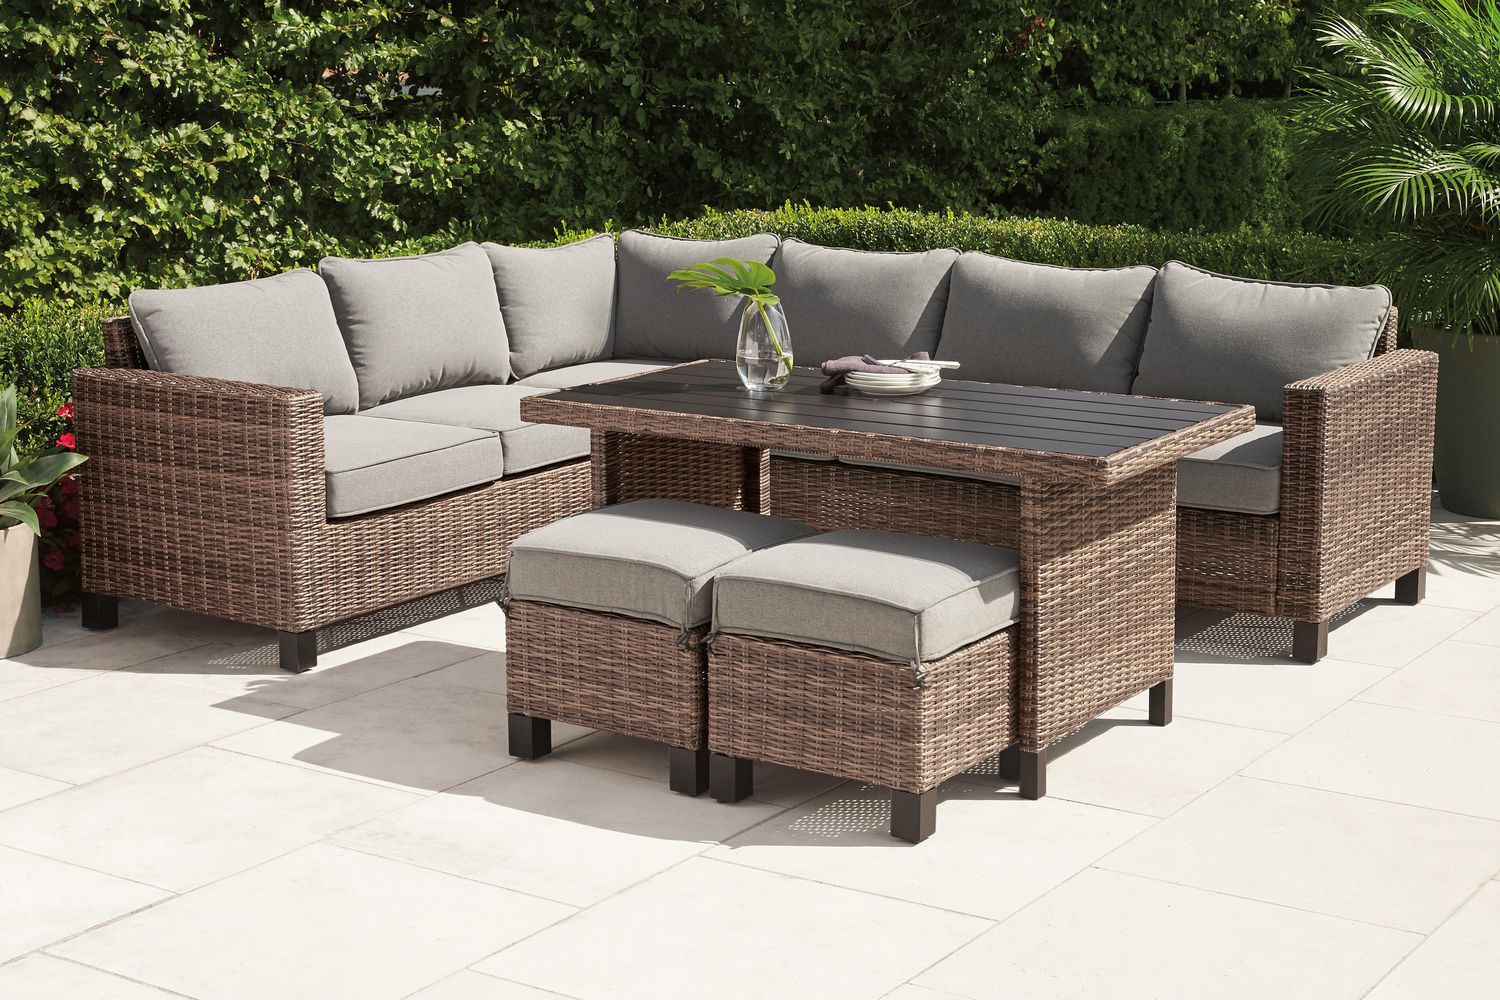 Hometrends Brookbury 5 Piece Sectional, Sectional Patio Sets Canada